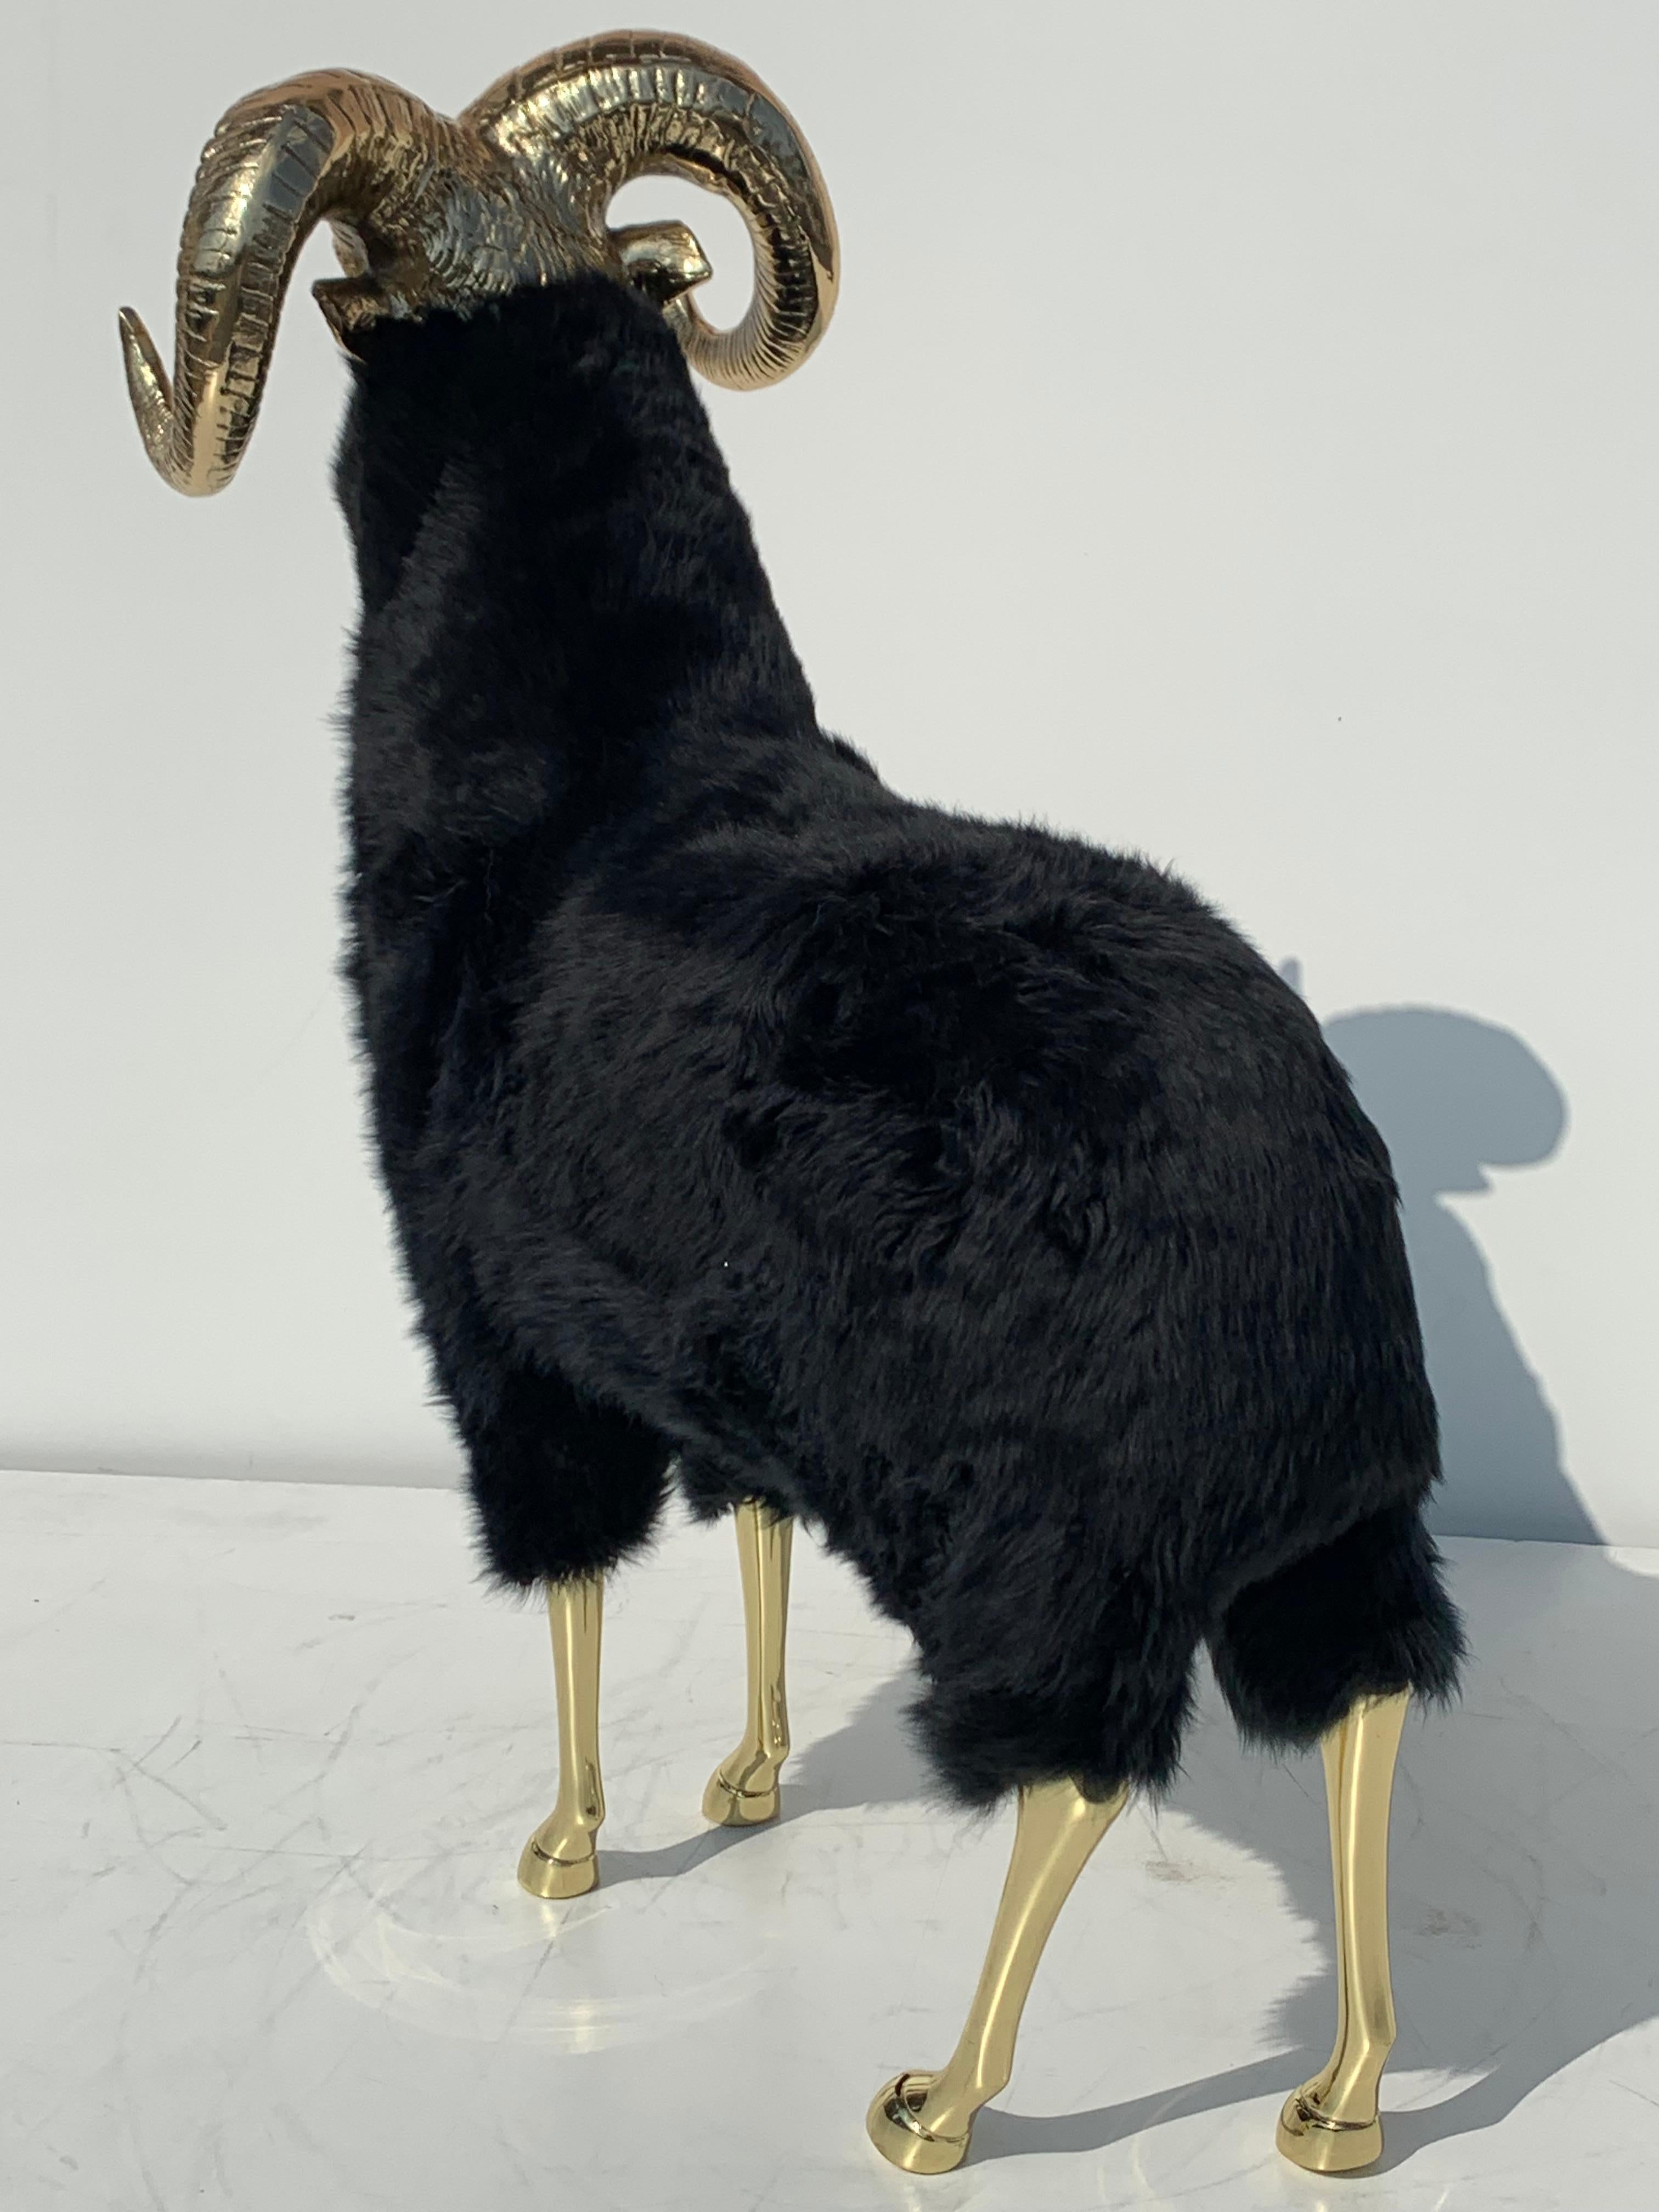 Polished Brass Mountain Sheep or Ram Sculpture in Black Fur